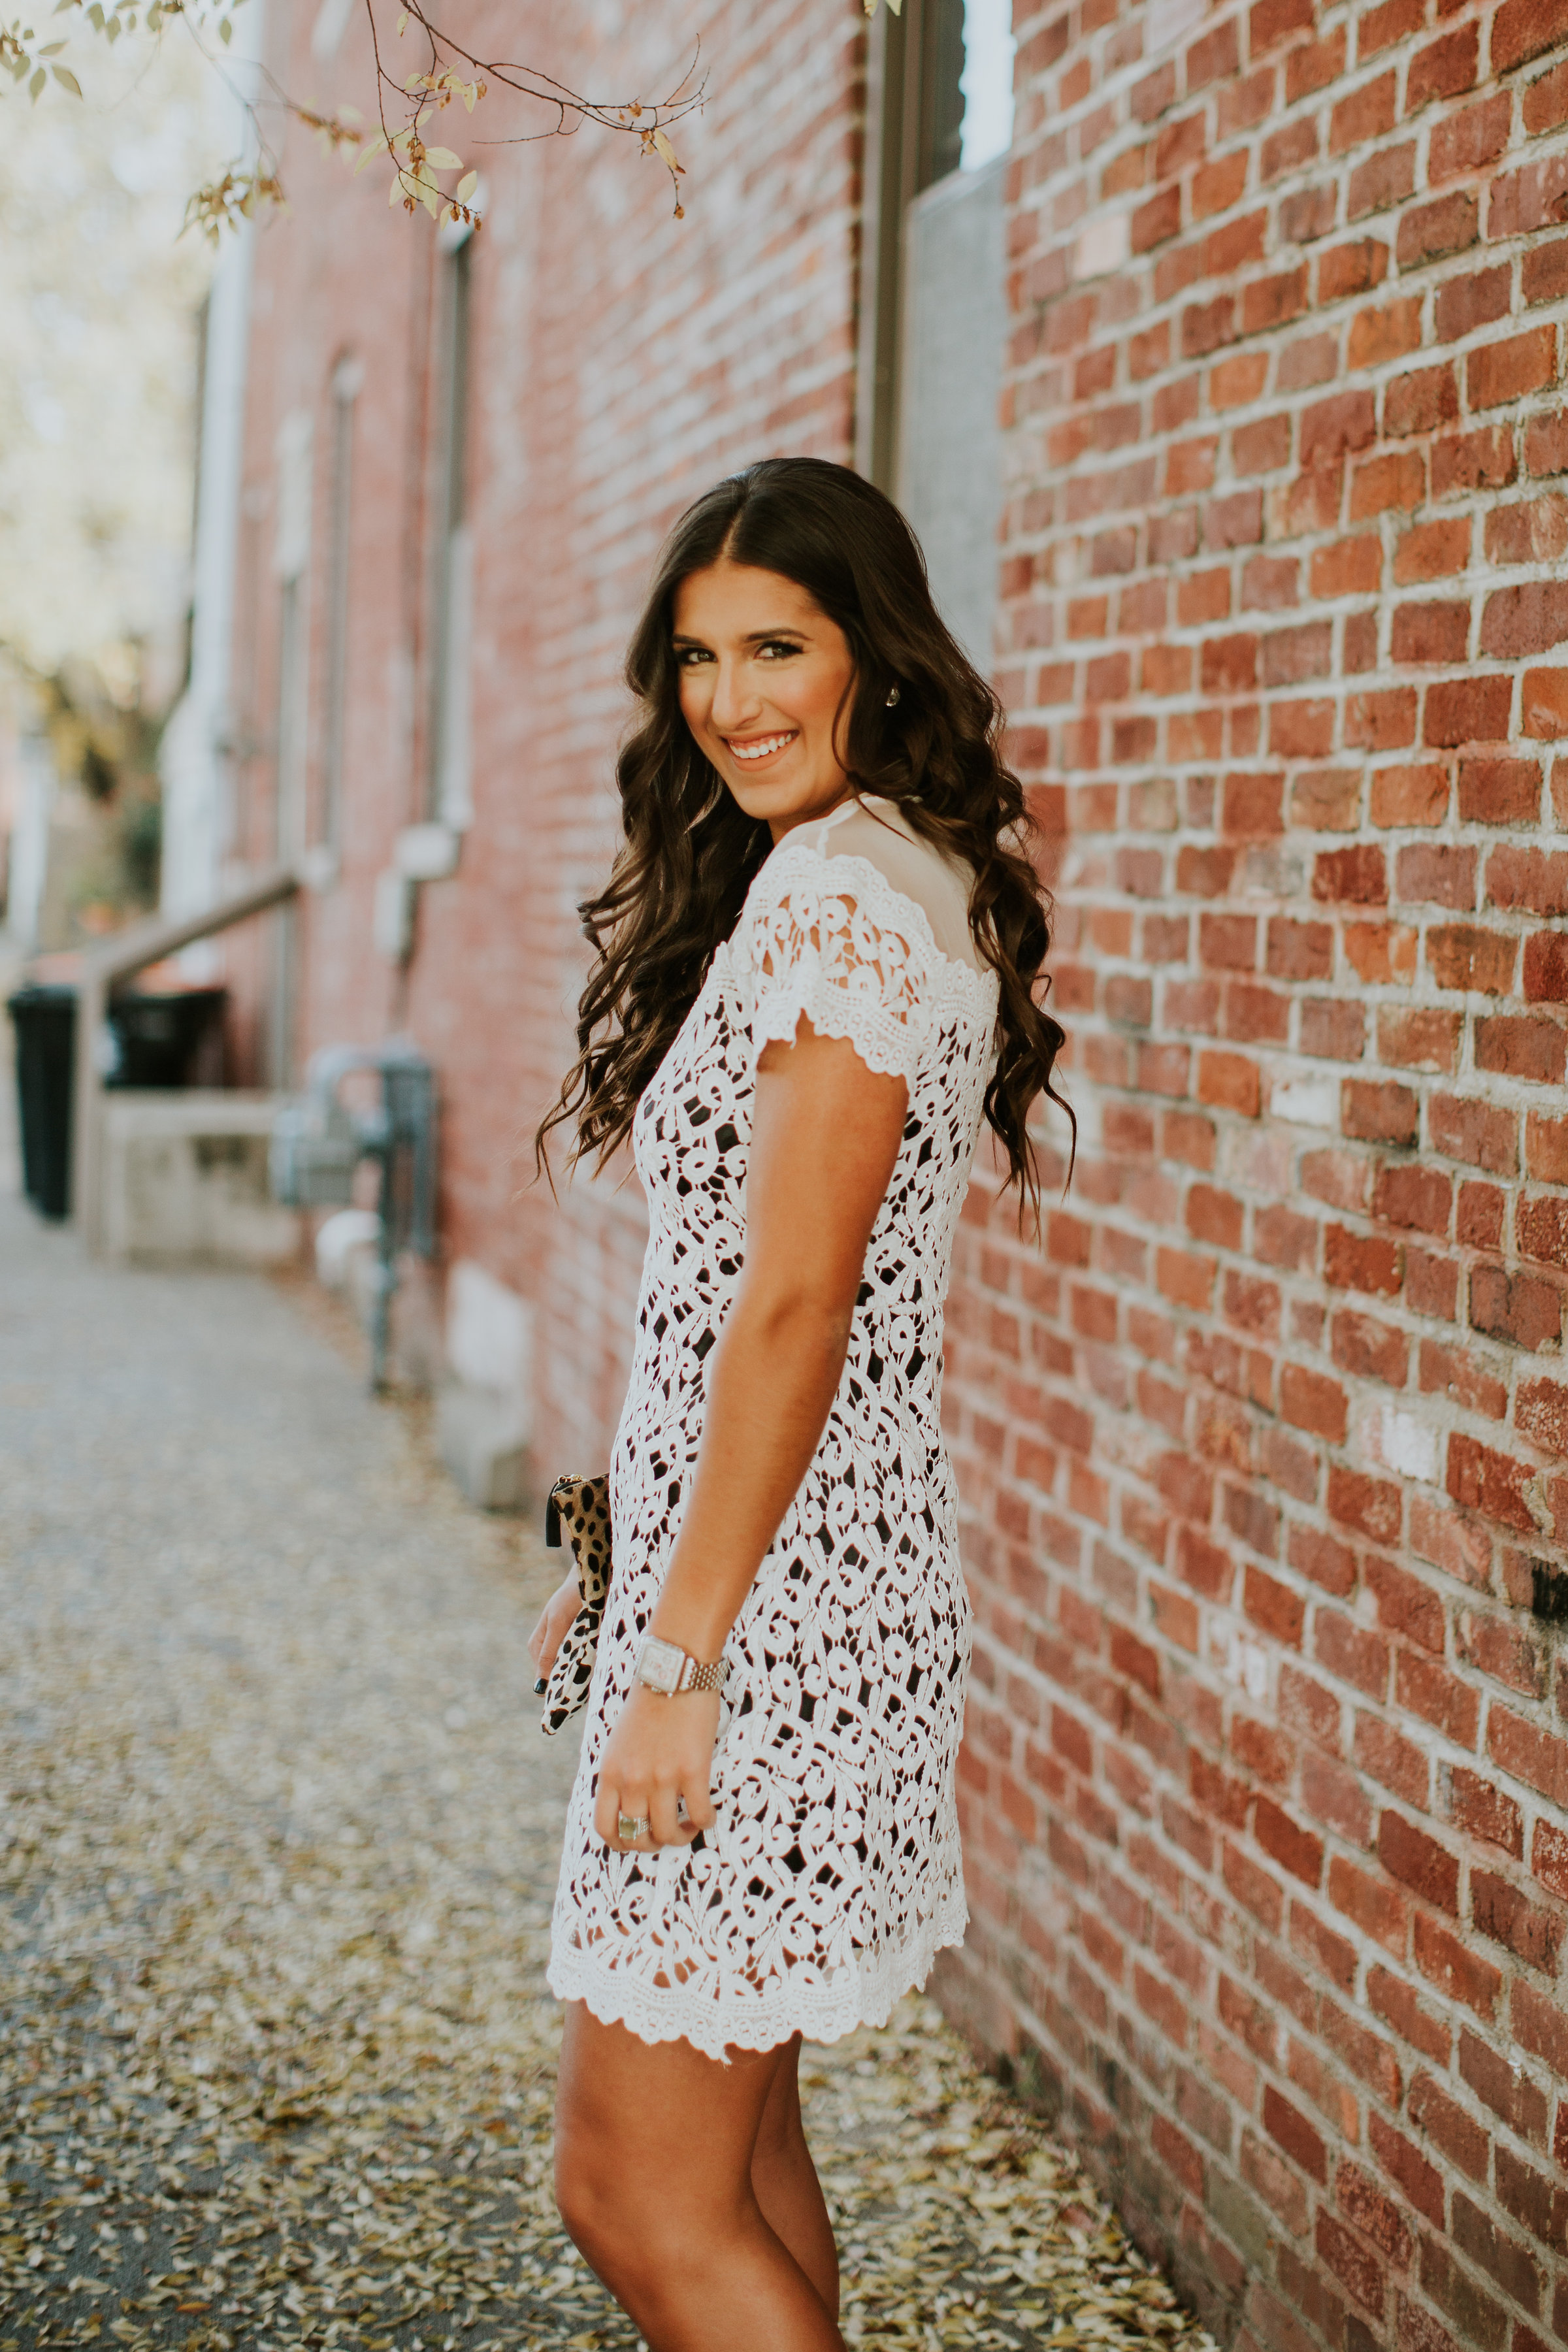 lace cap sleeve dress, chicwish dress, holiday fashion, holiday outfit, winter white, winter white dress, leopard clutch, clare v calf hair clutch, cocktail dress, cocktail party // grace wainwright a southern drawl